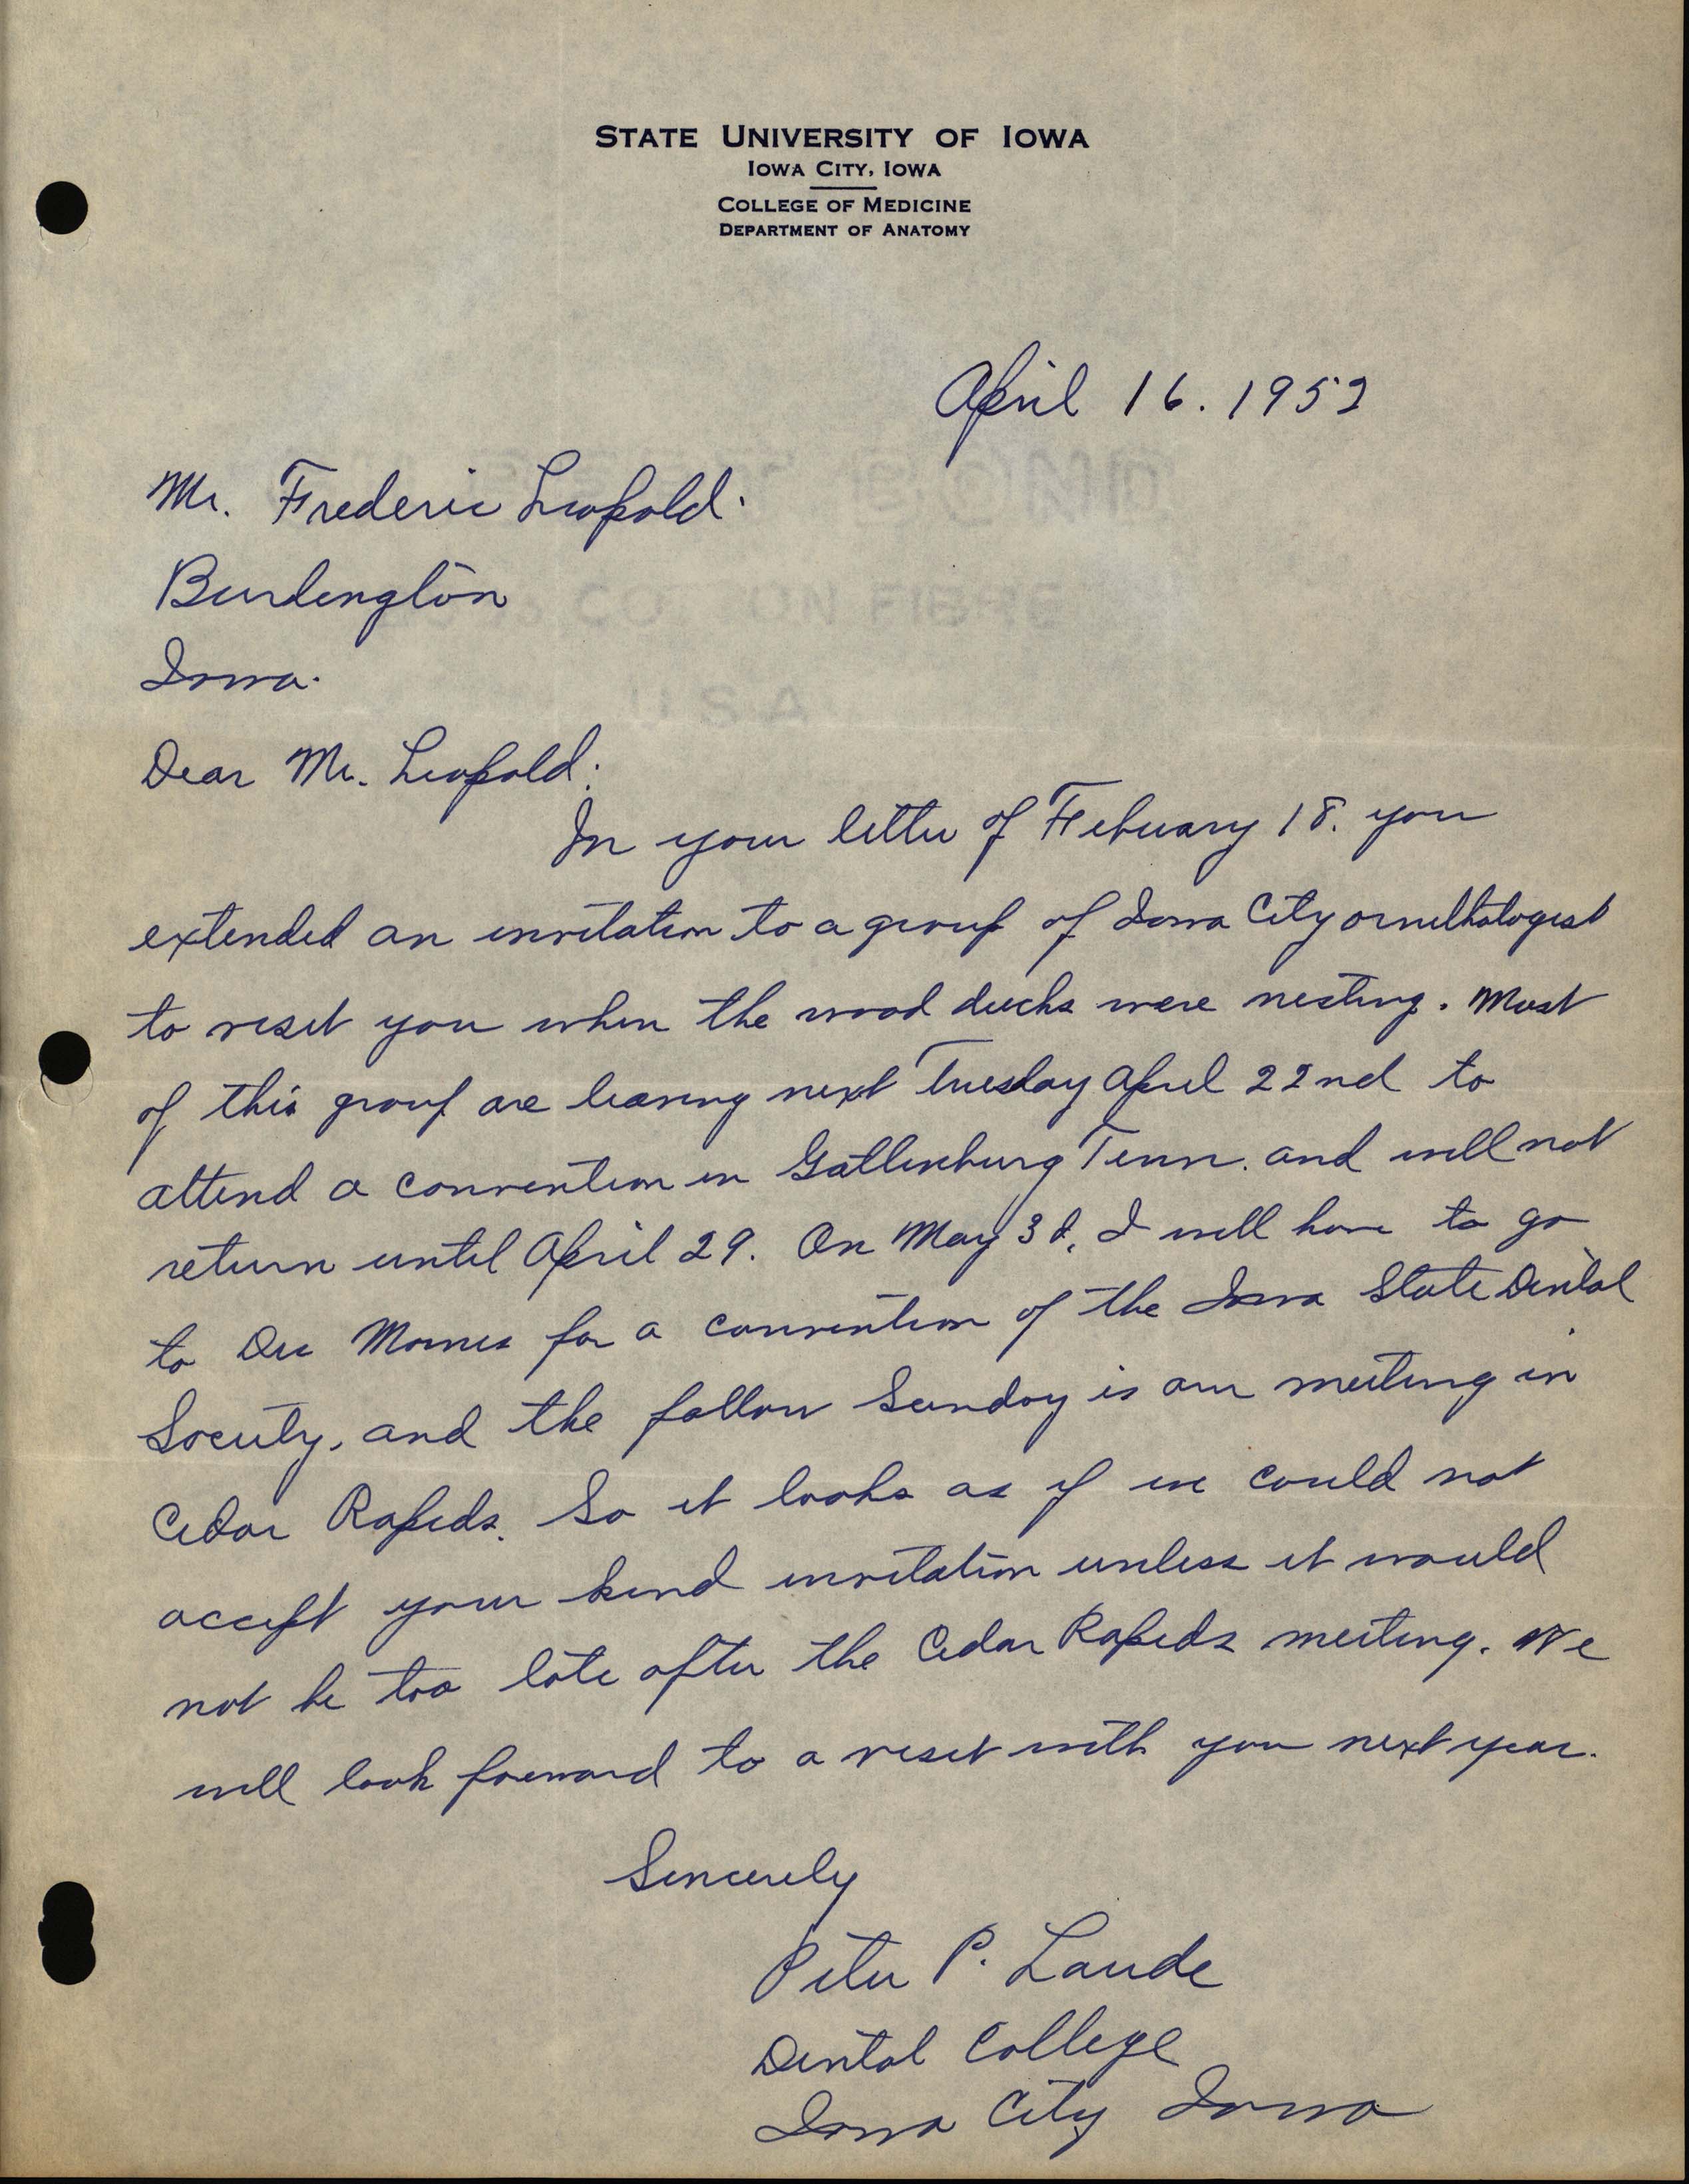 Peter P. Laude letter to Frederic Leopold regarding an invitation to view nesting Wood Ducks, April 16, 1952